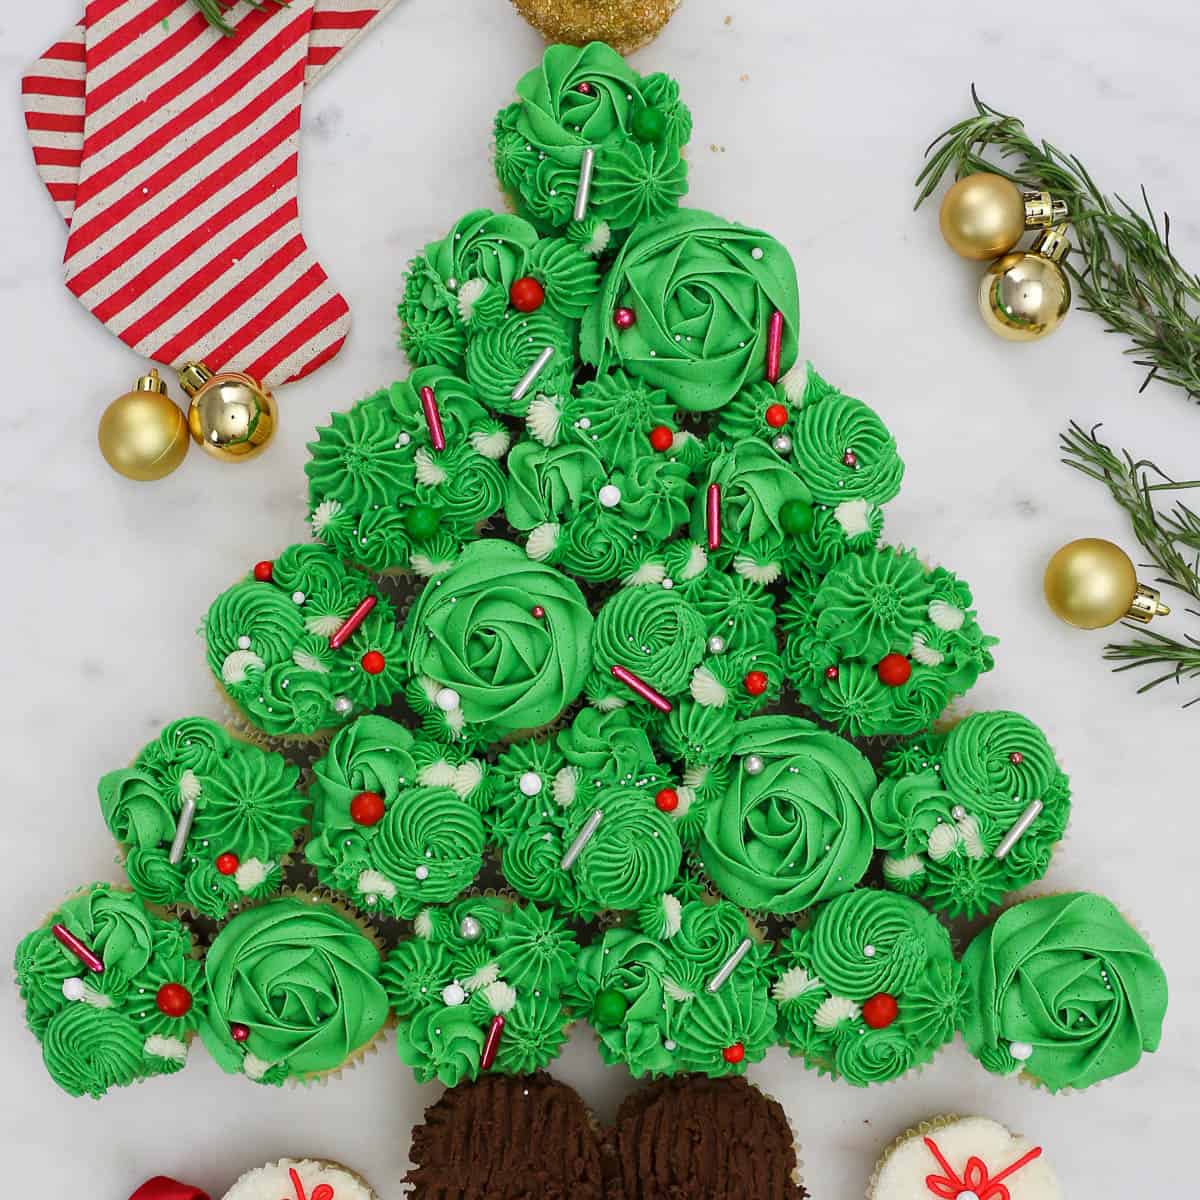 8 Little Debbie Christmas Tree Cake Recipes You Need To Try